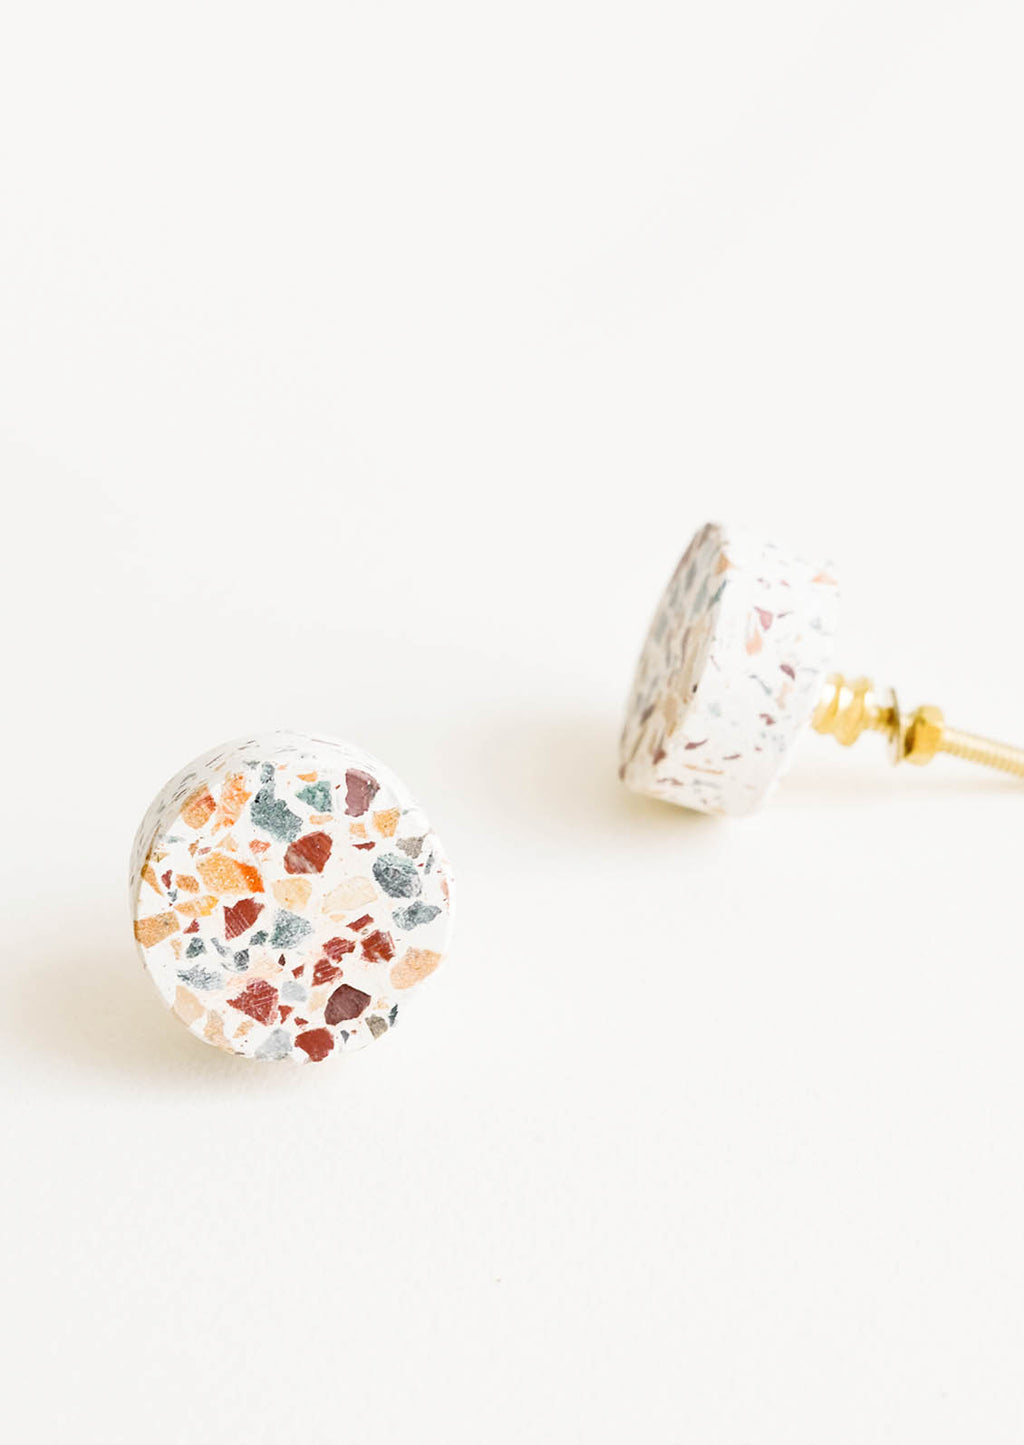 1: Round drawer knob in white stone with multicolor terrazzo pattern